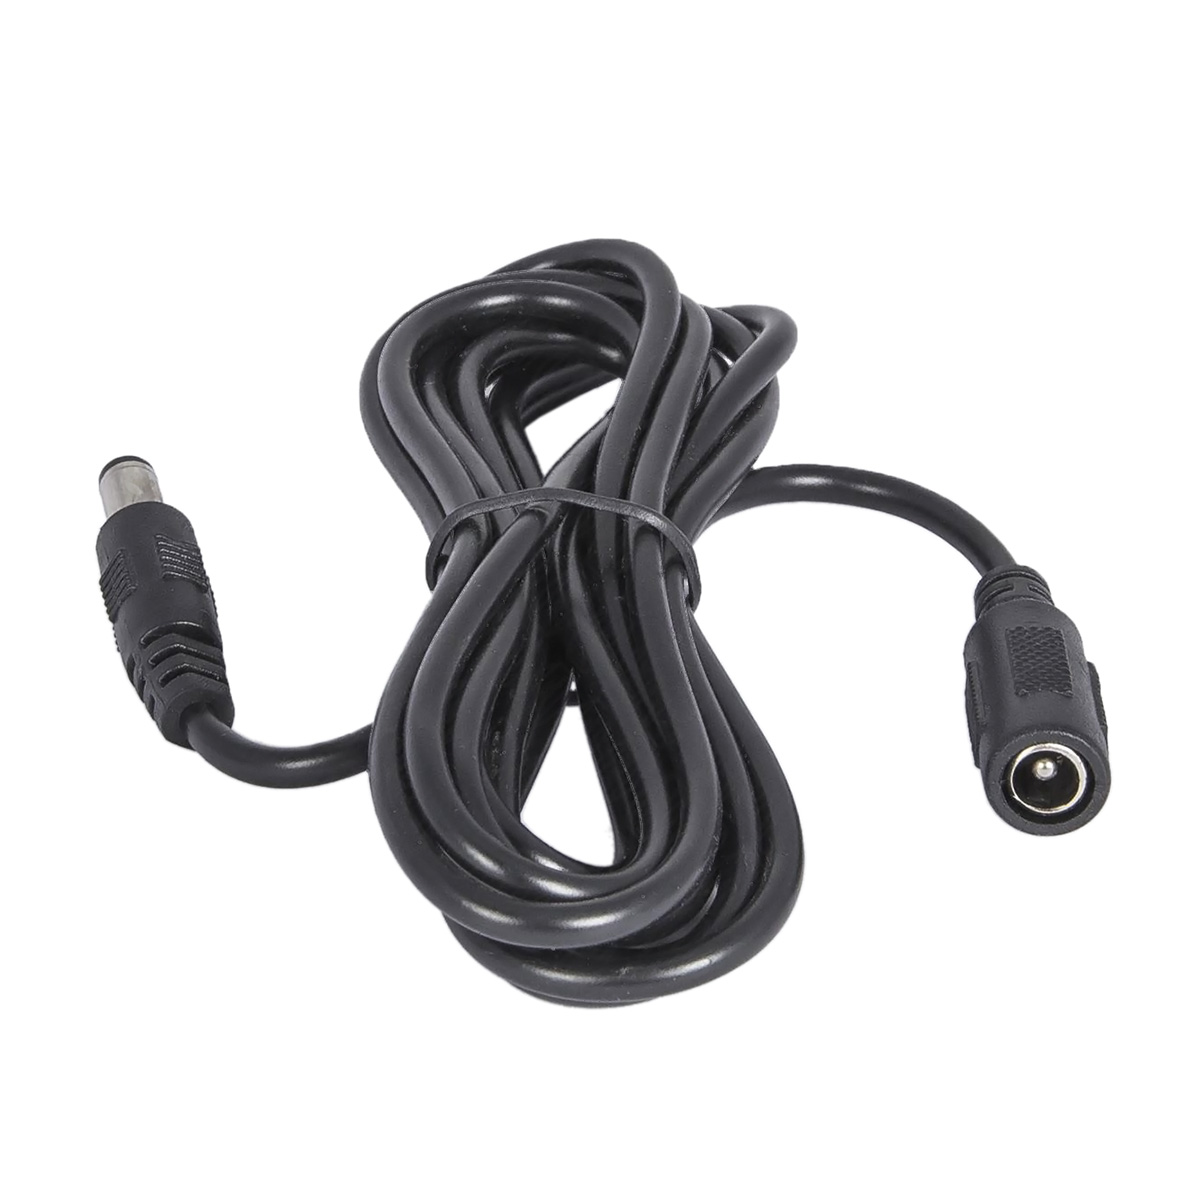 Baader 2m extension cable for 12v cable with Baader Outdoor Telescope Power Supply